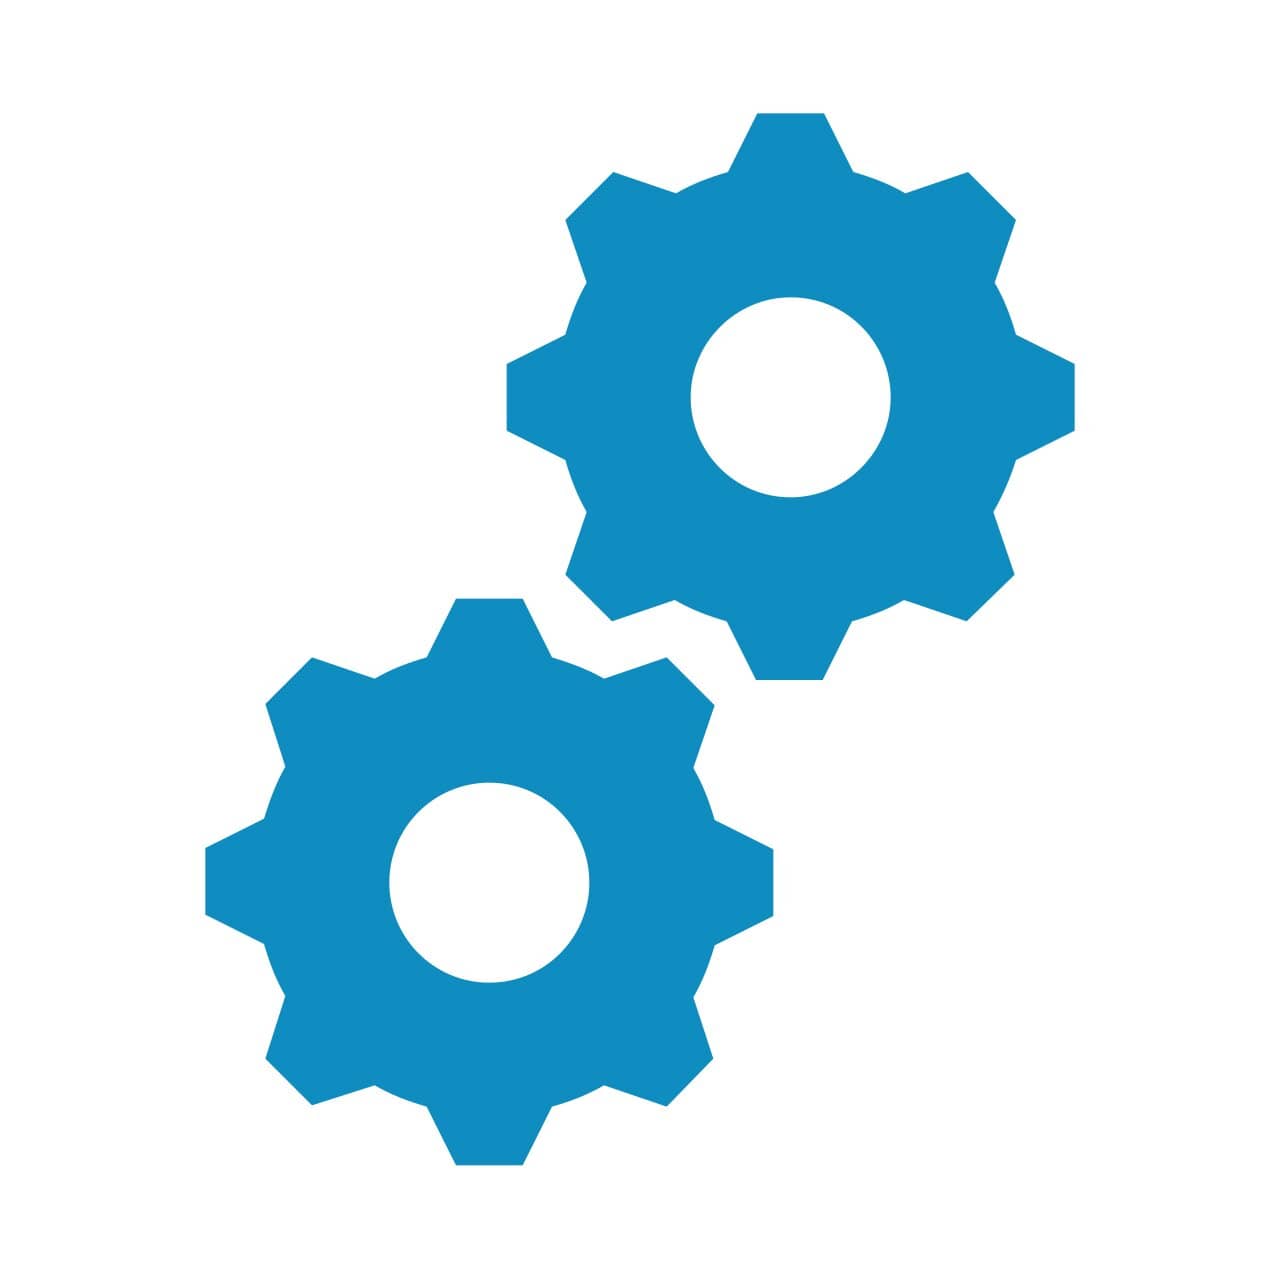 A blue icon showing cogs turning, symbolising gears in motion for the engineering and production work